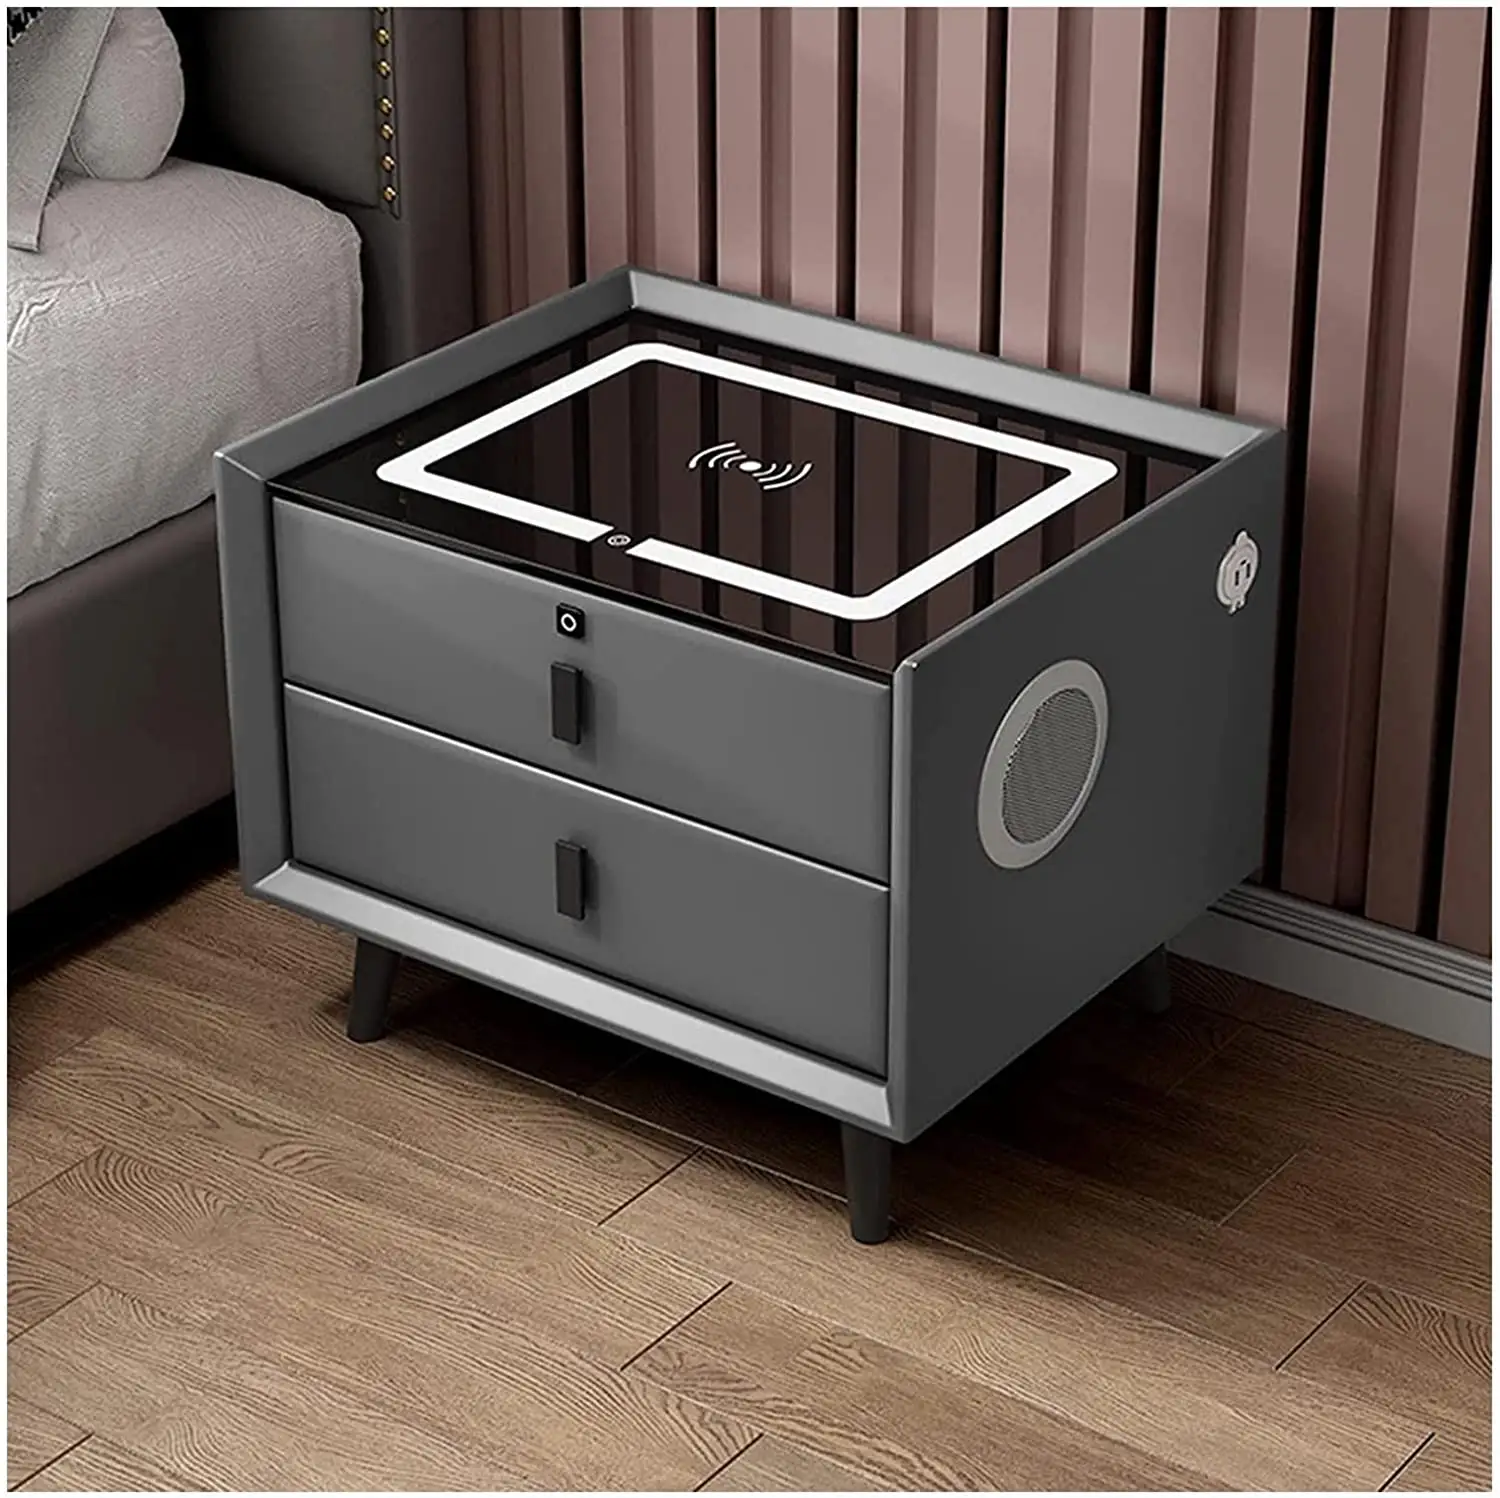 New Nordic Bedroom Smart Bedside Table High Quality All Inclusive Tech Belt Speaker and LED Light Design Table